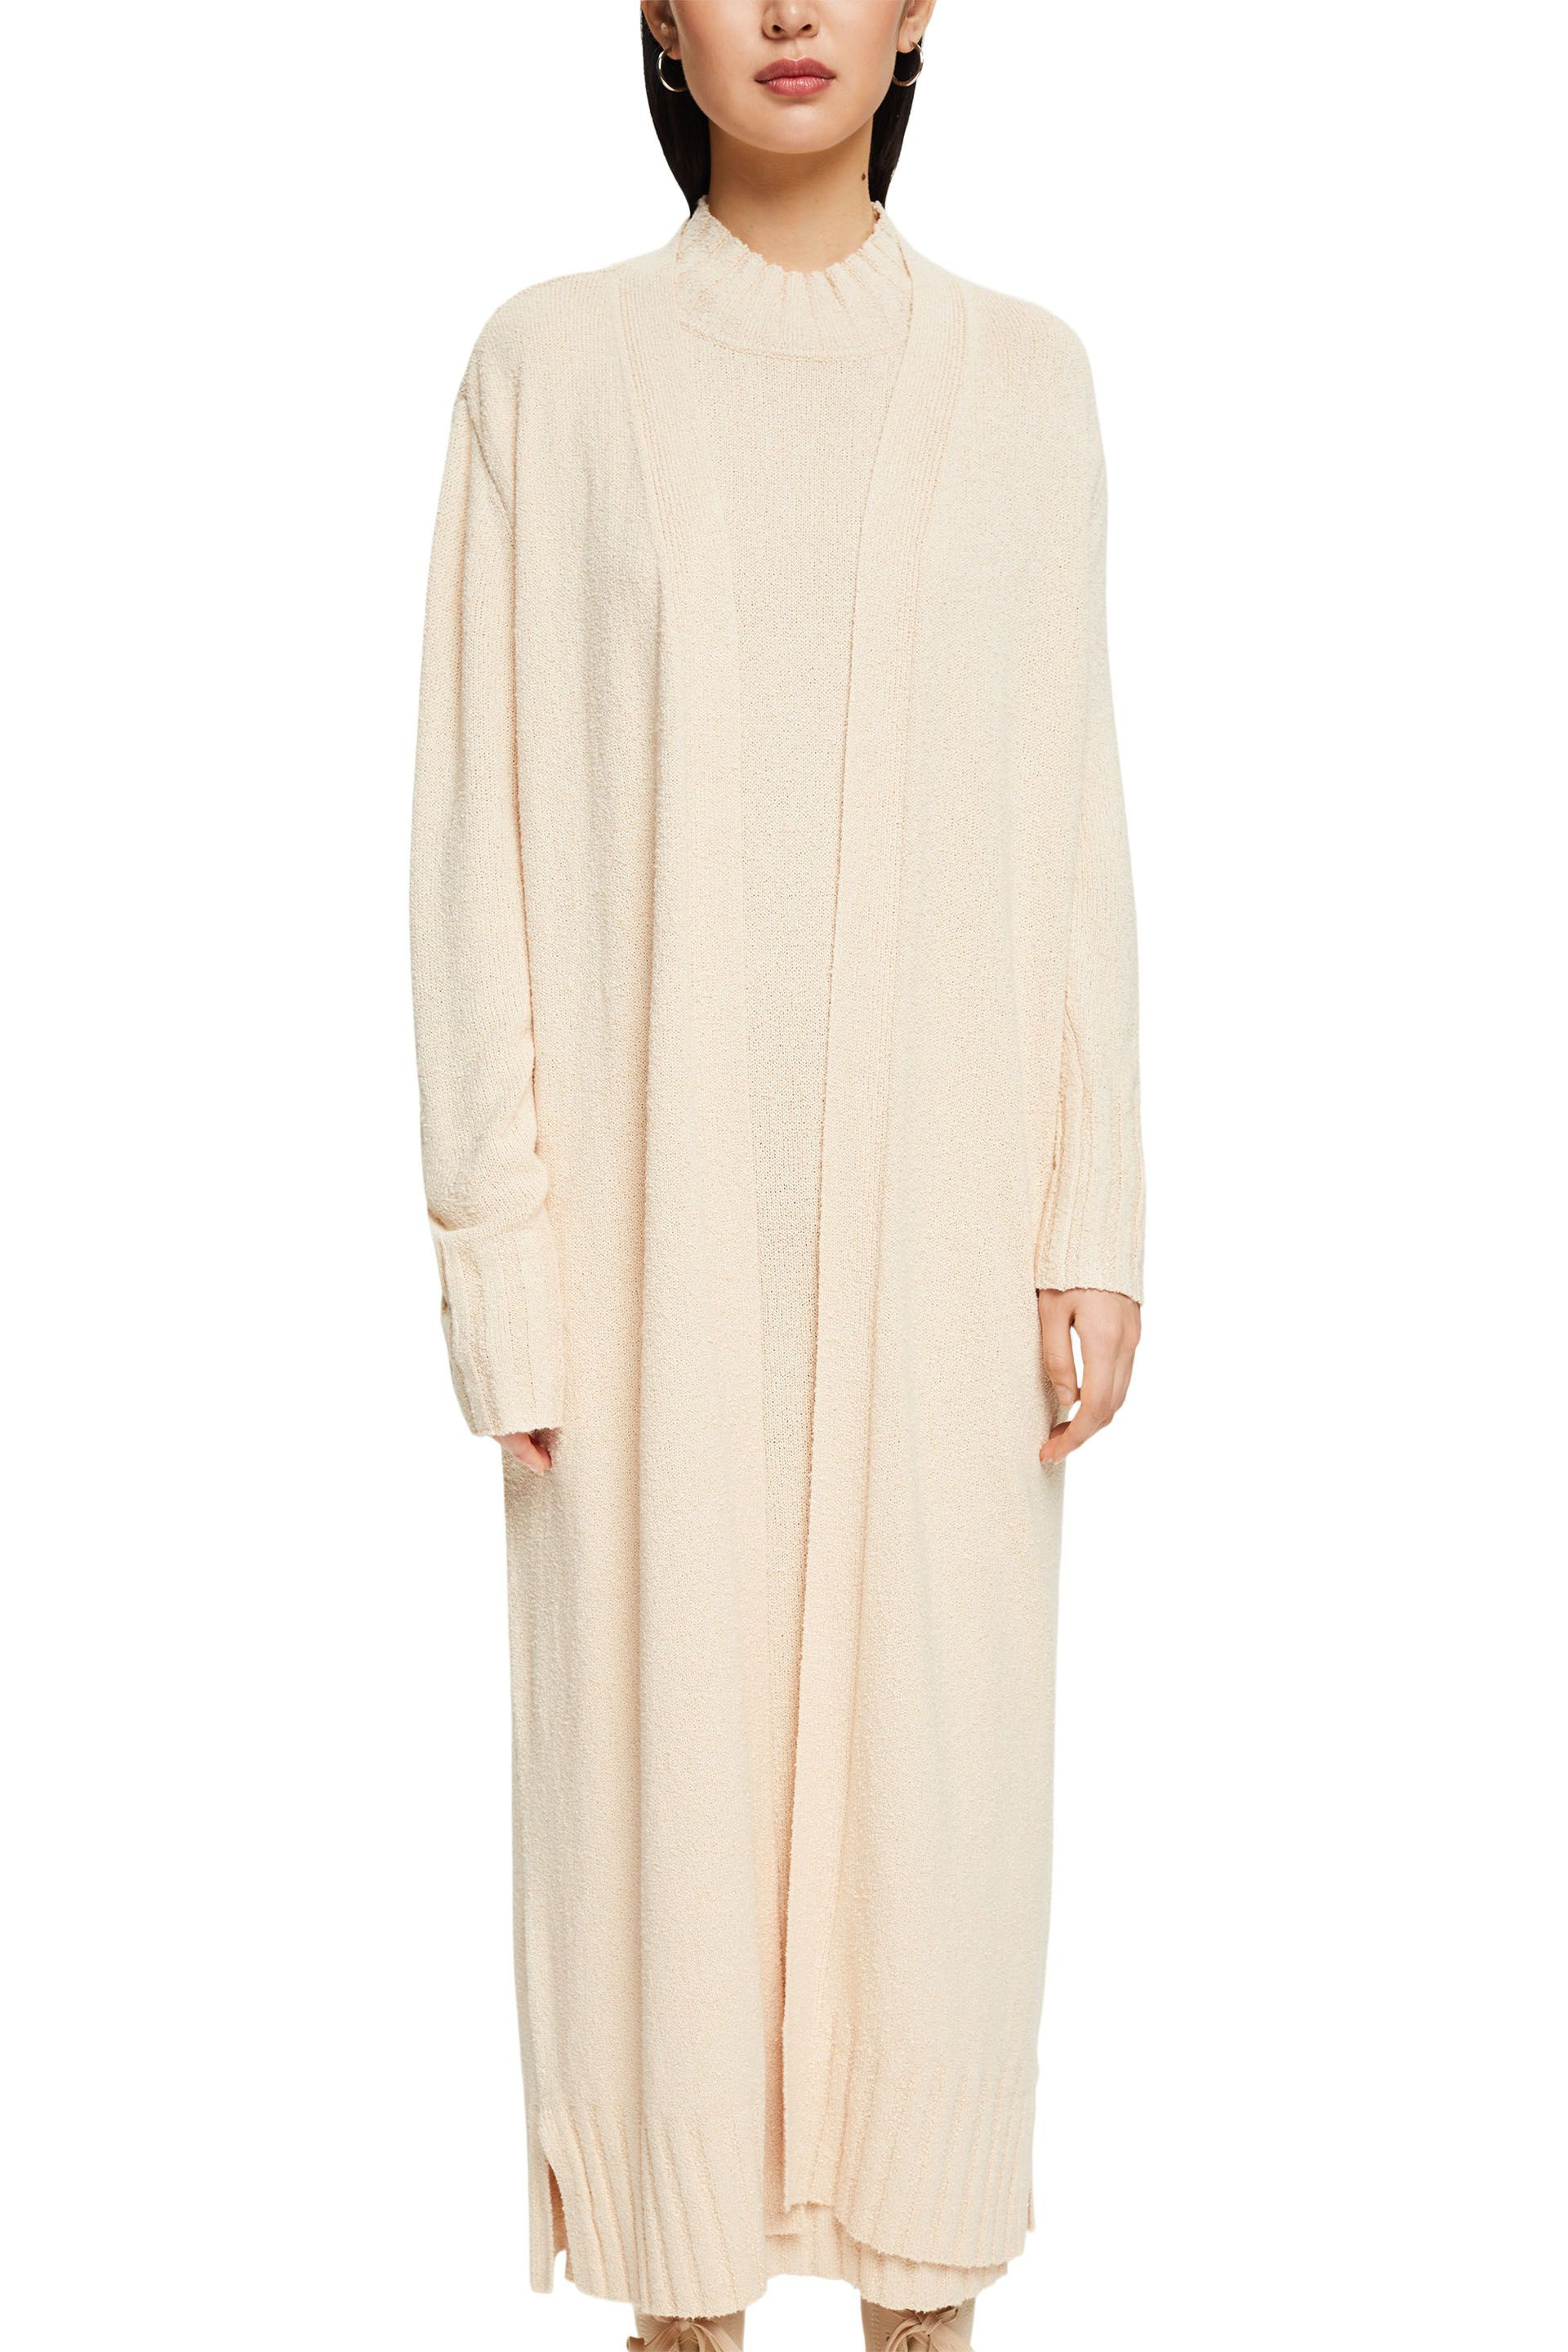 Cardigan lungo in maglia, Beige, large image number 1